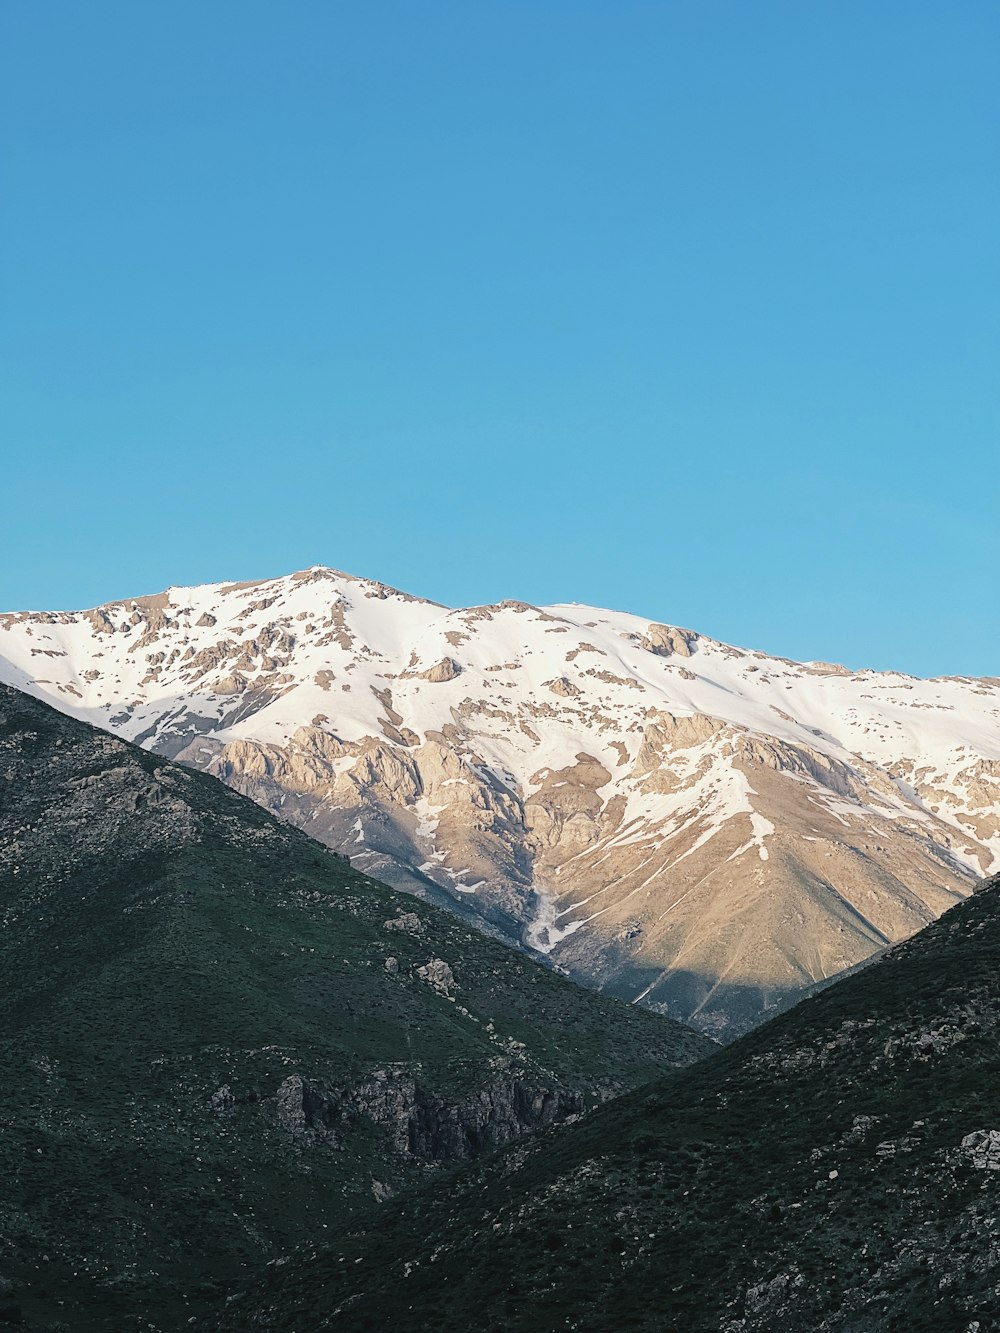 a view of a mountain range with snow on the top